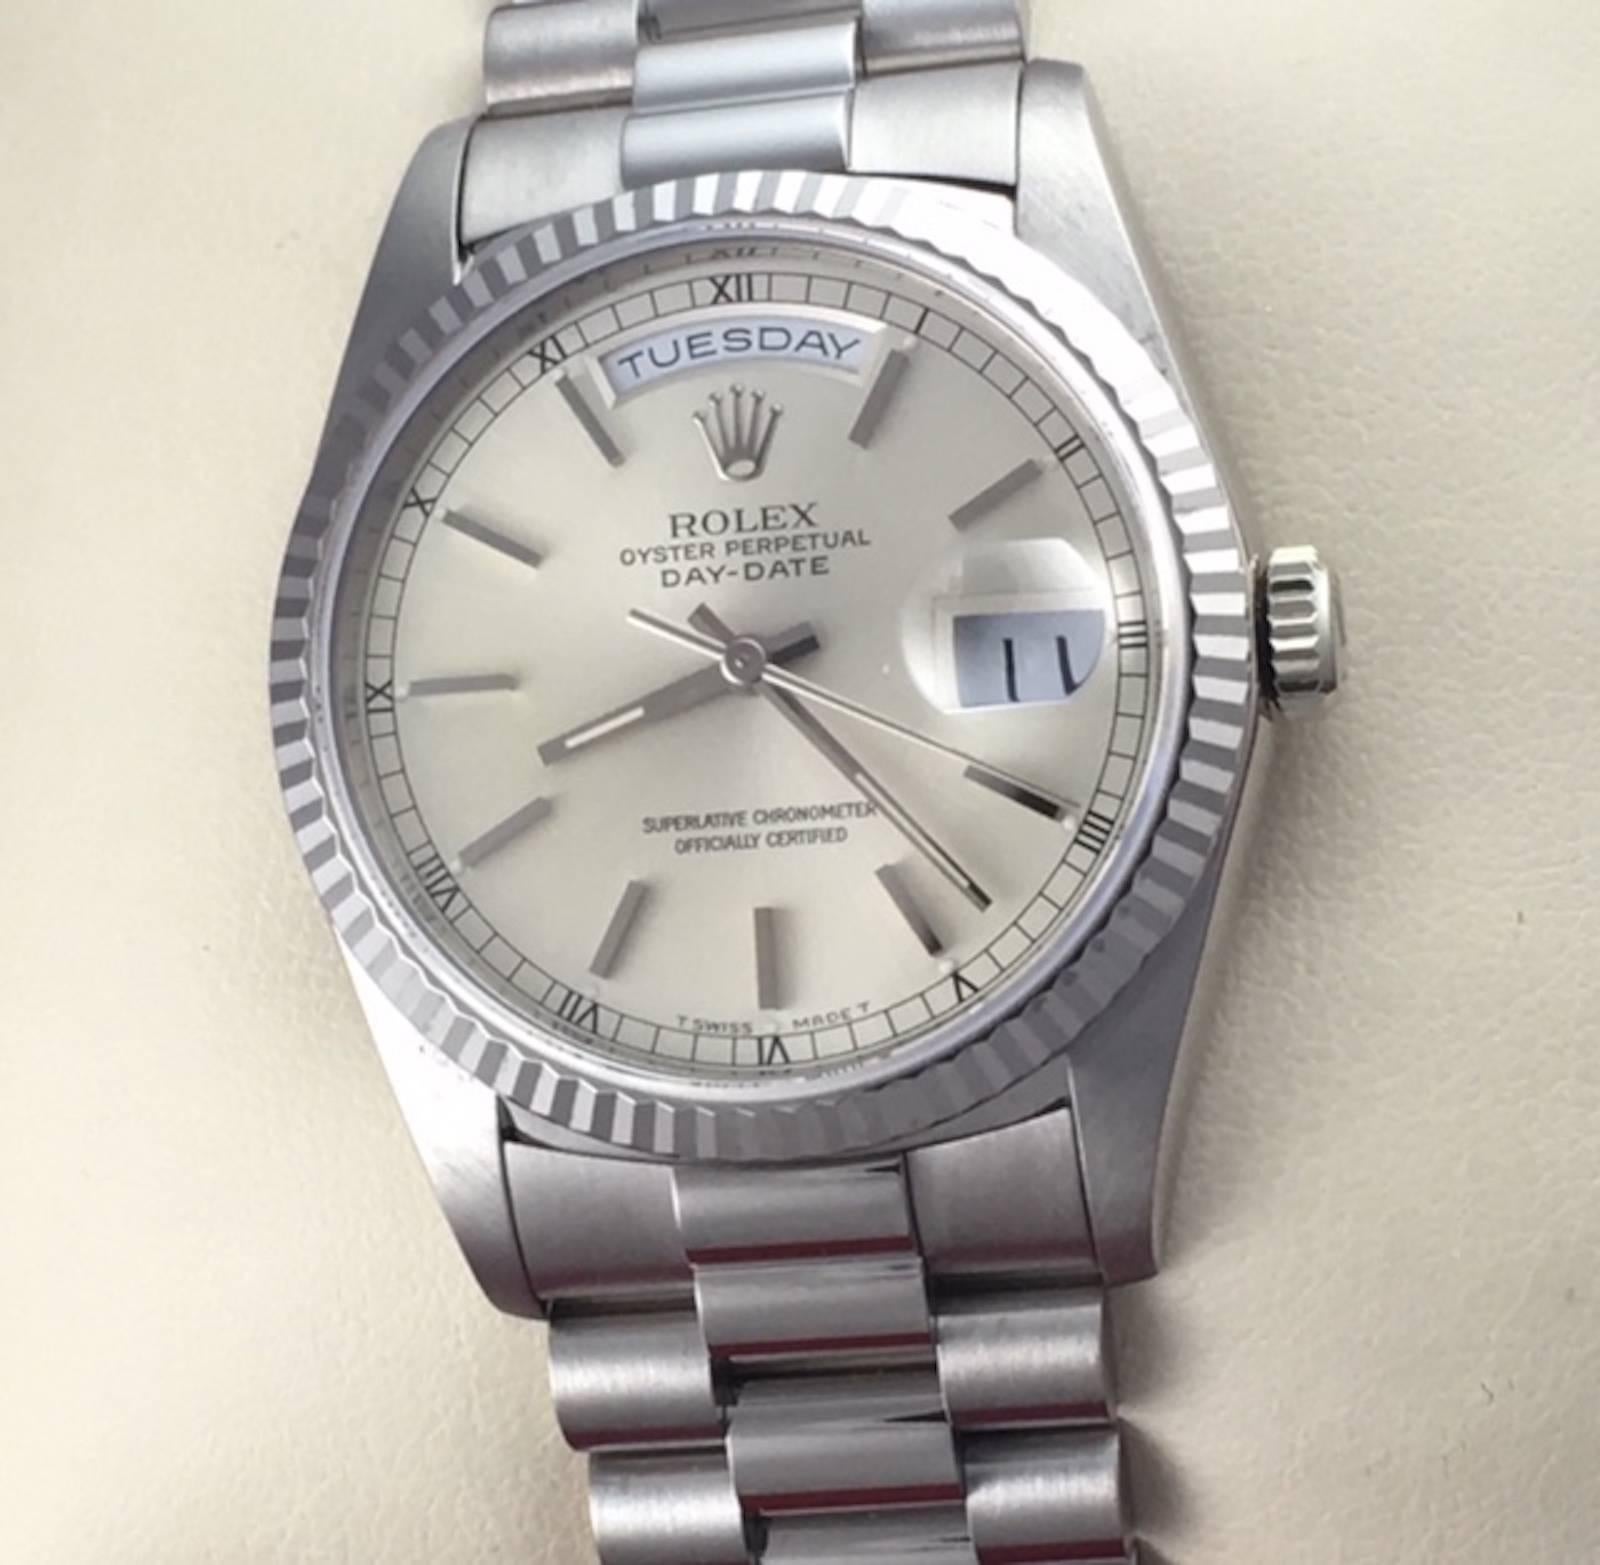 The Rolex President Day-Date Model 18239 pre-owned men's automatic wrist watch. Certified pre-owned and ready to ship.  Featuring an oyster silvered dial with polished hour markers and 18k white gold case with fluted bezel. Measures 36mm. Comes on a